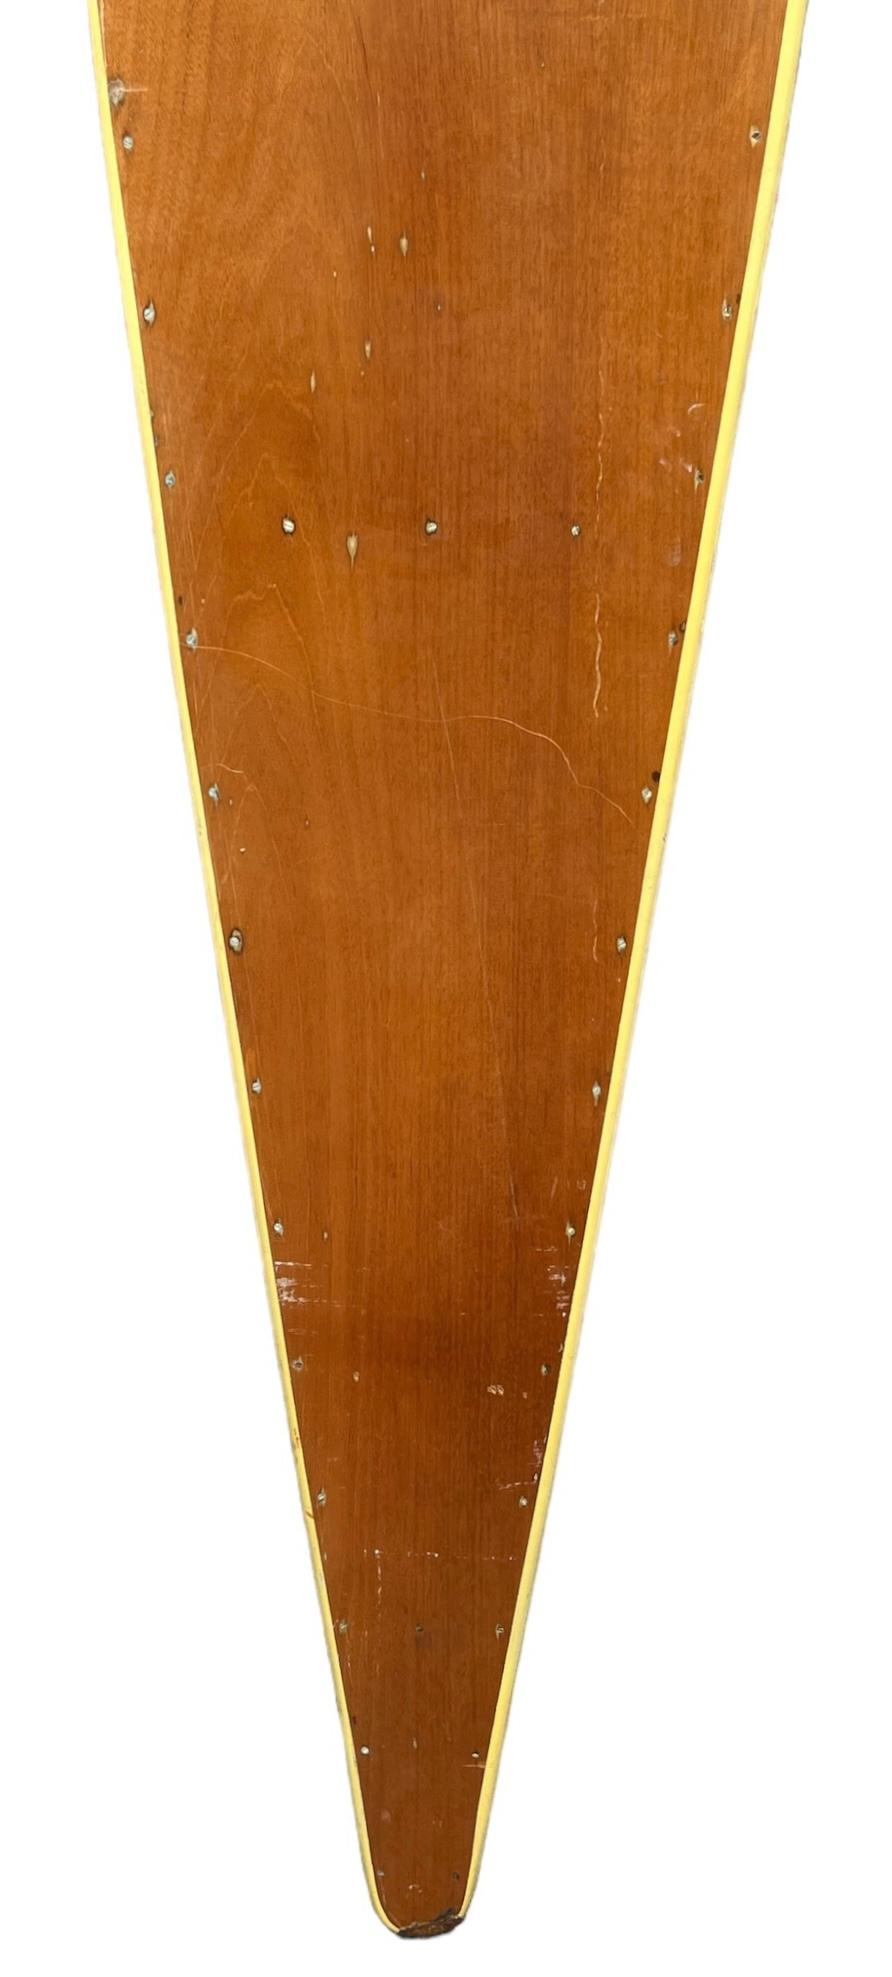 1930s Replica Tom Blake hollow wooden surfboard For Sale 1